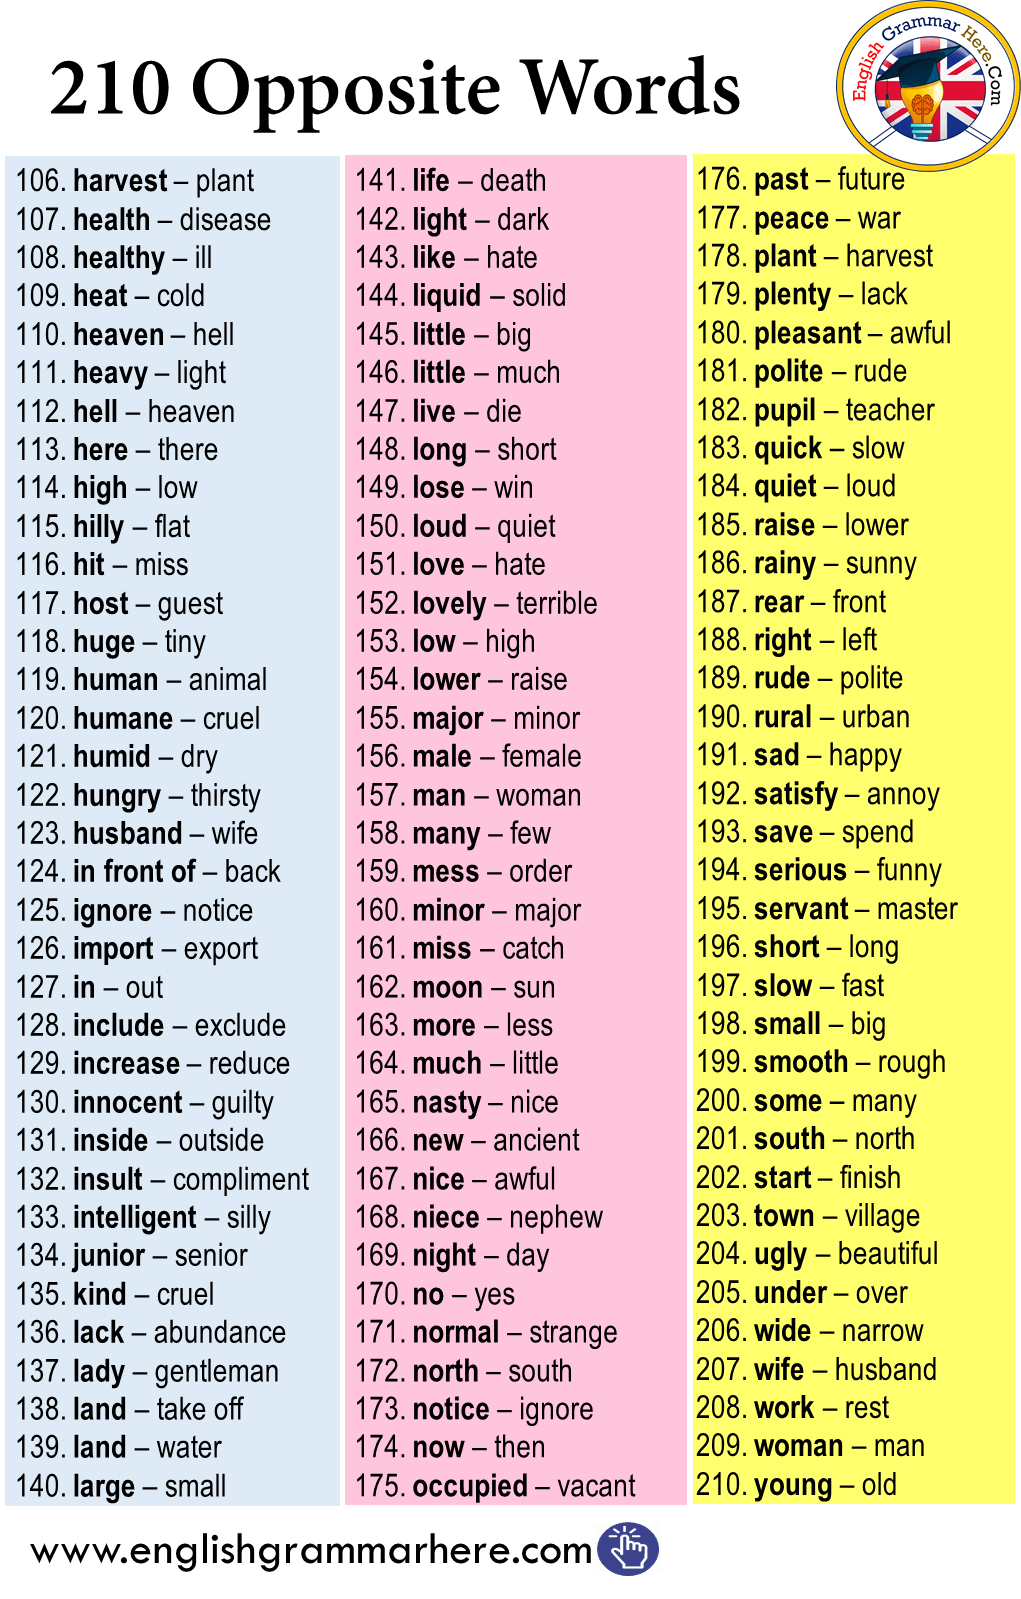 210 Opposite Words in English